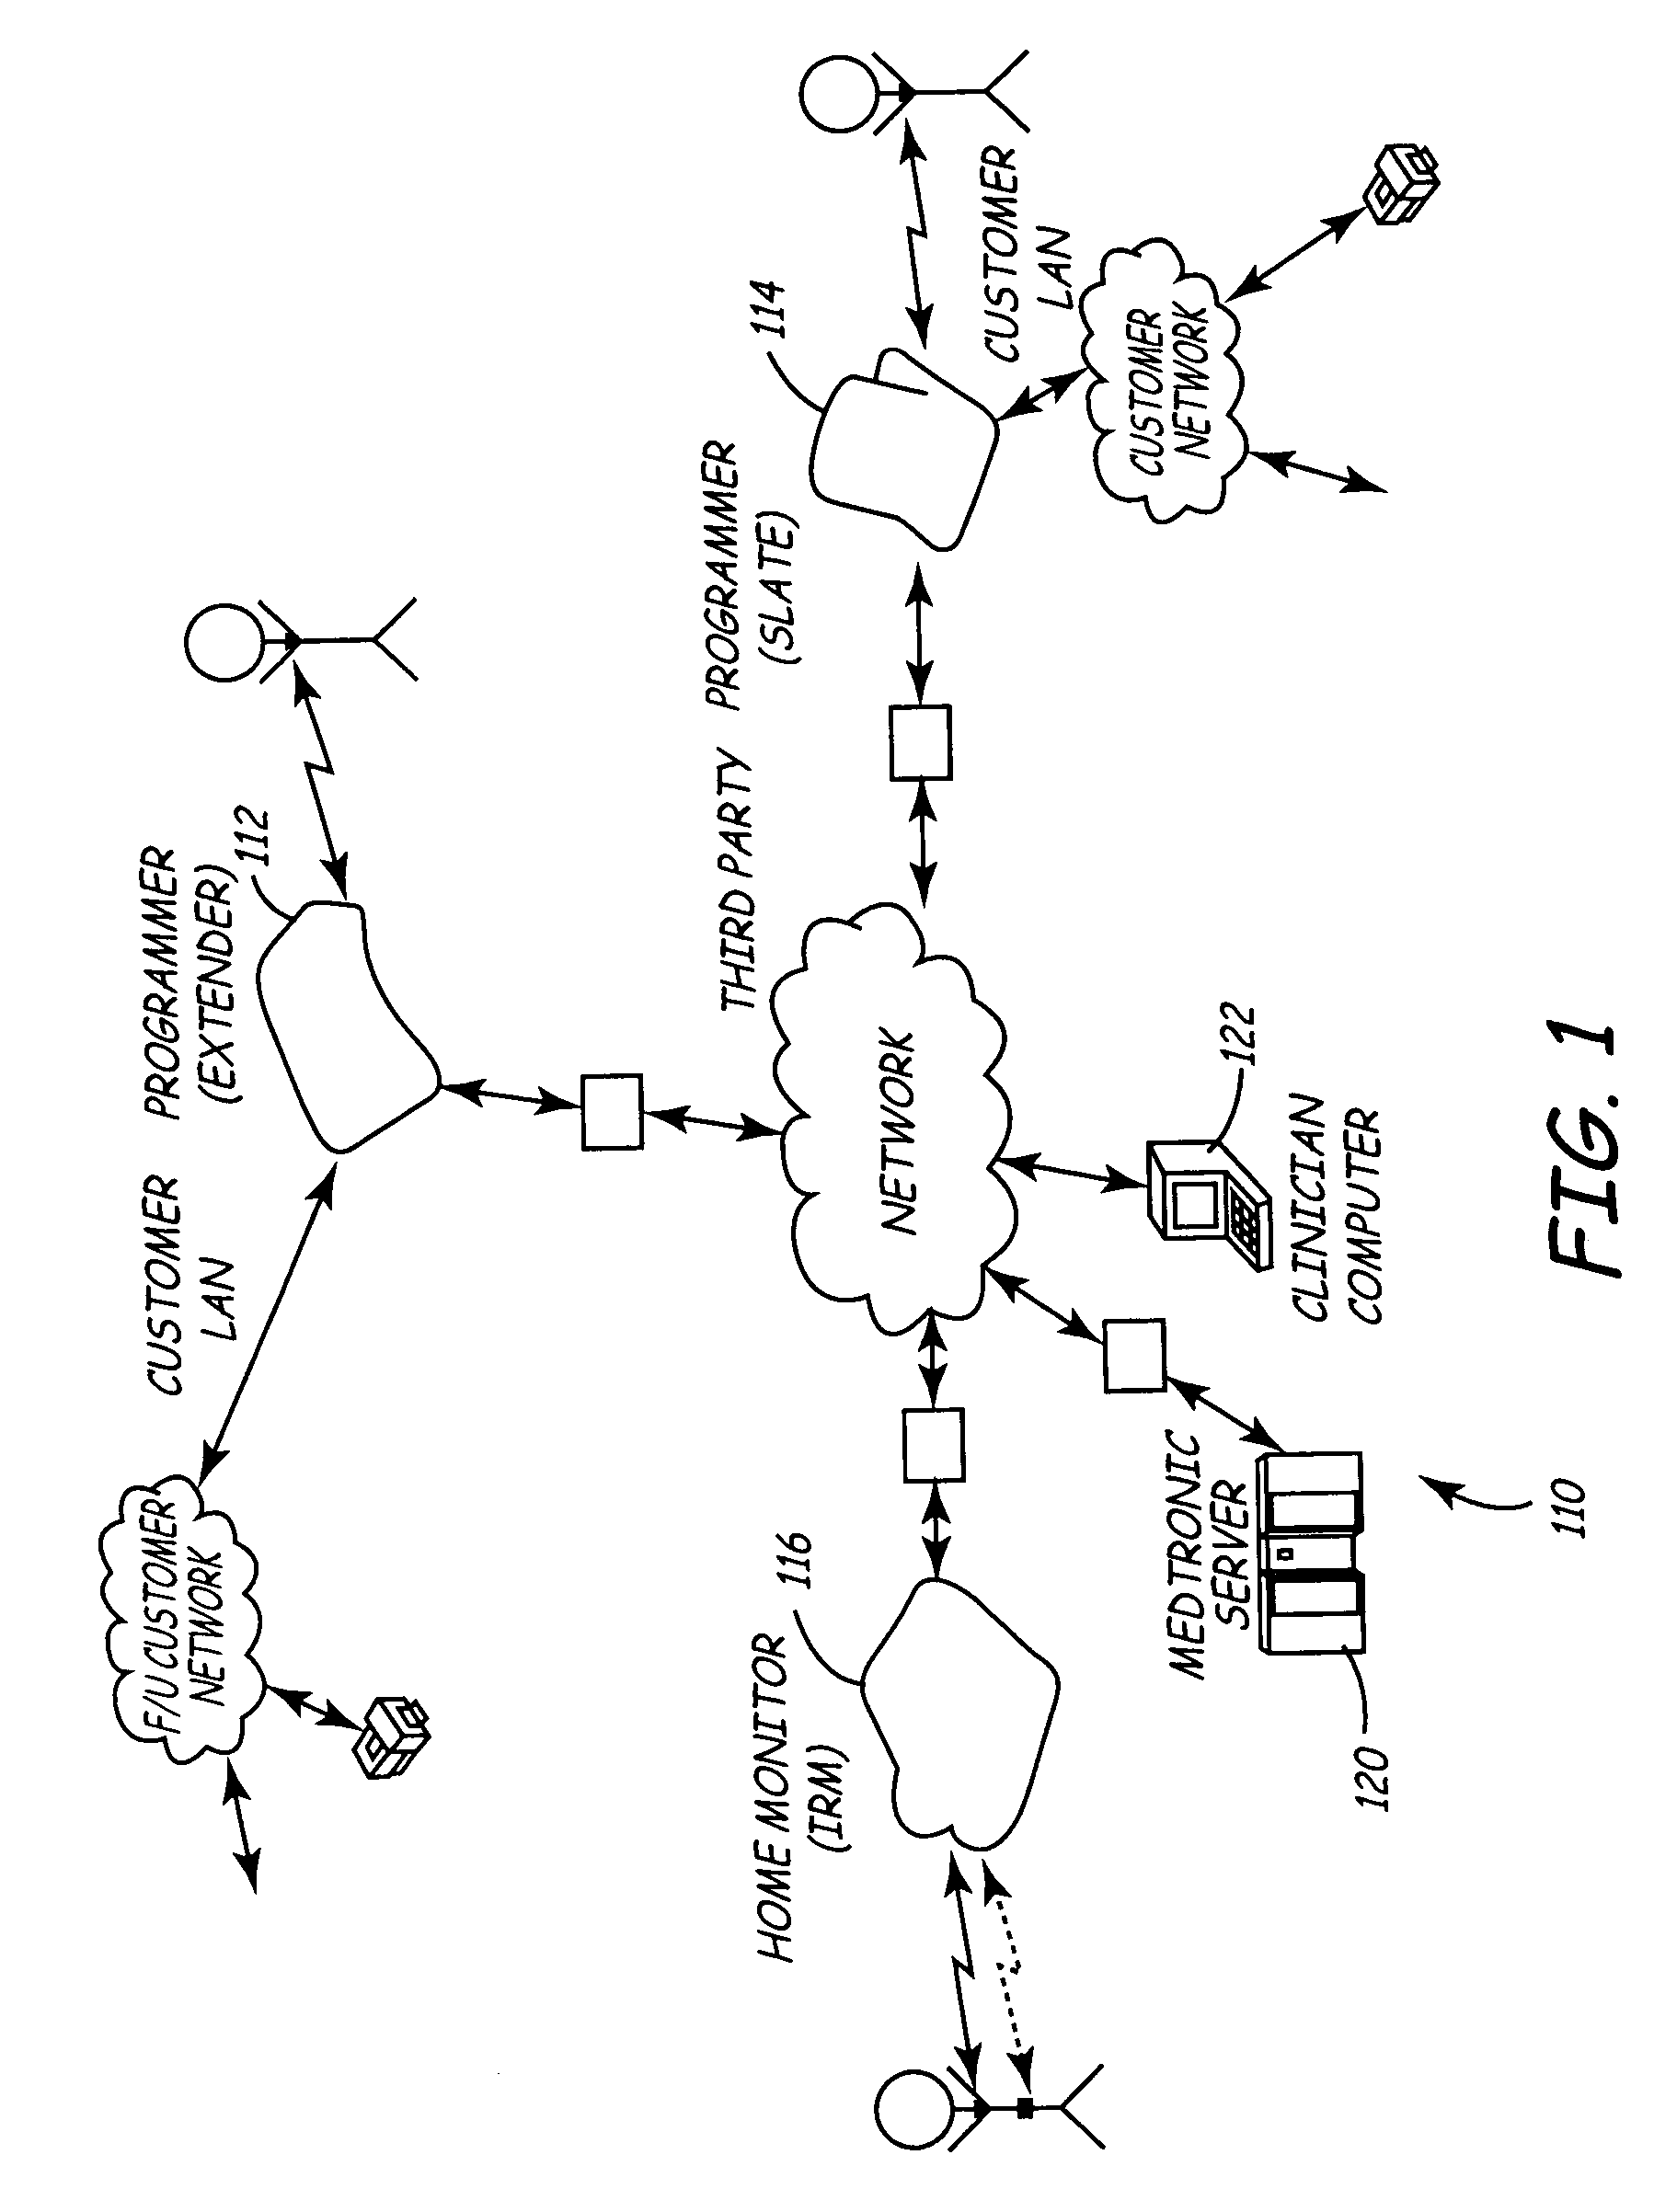 Variable encryption scheme for data transfer between medical devices and related data management systems